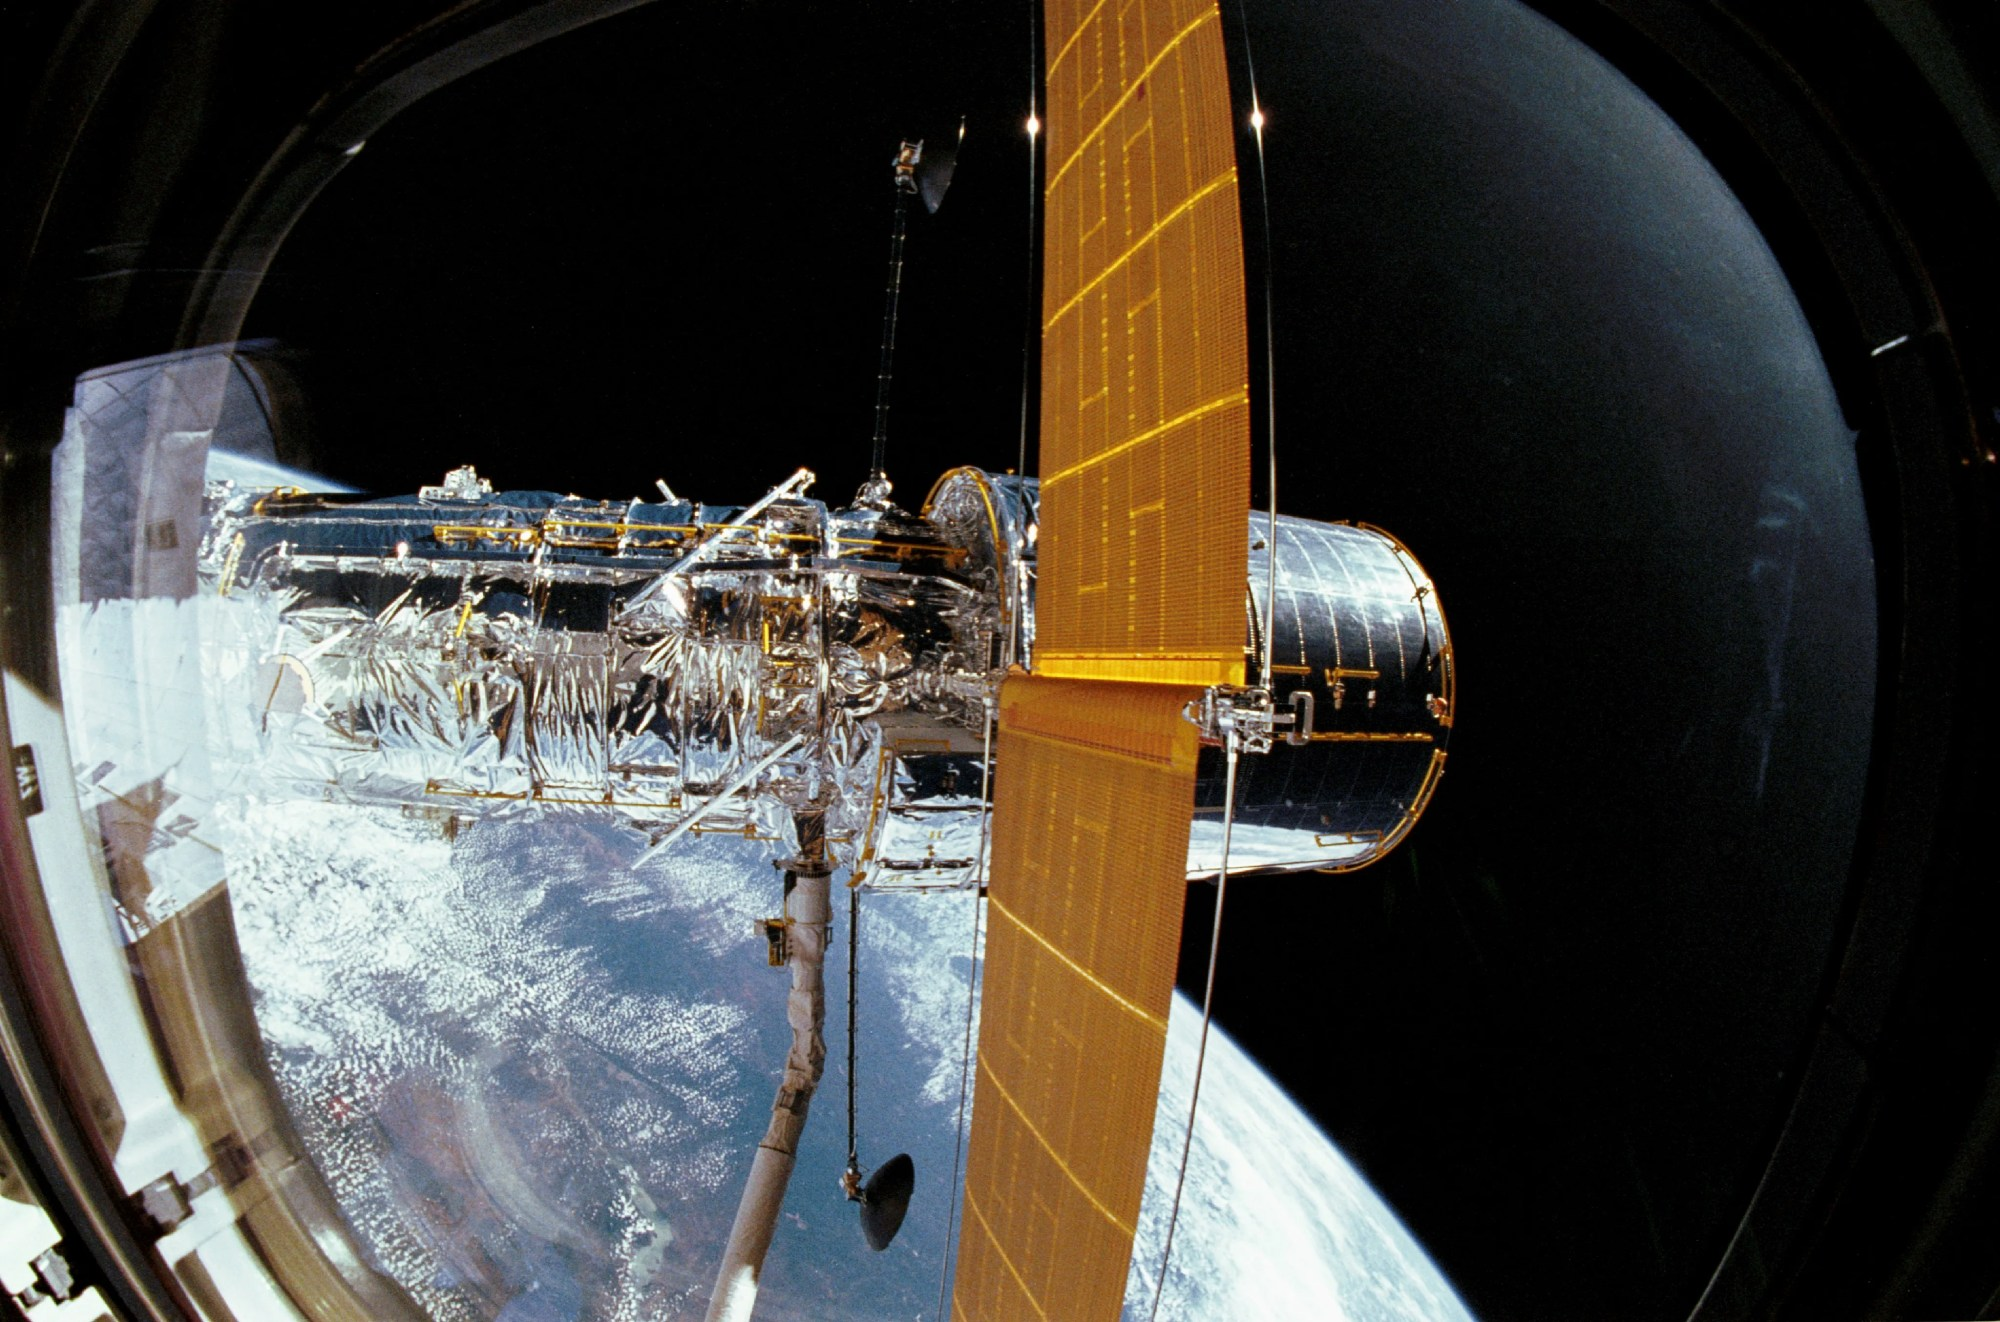 The Hubble Telescope in space gripped by the space shuttle's robotic arm. One solar panel is deployed. The round rim of the window through which the picture was taken is visible.